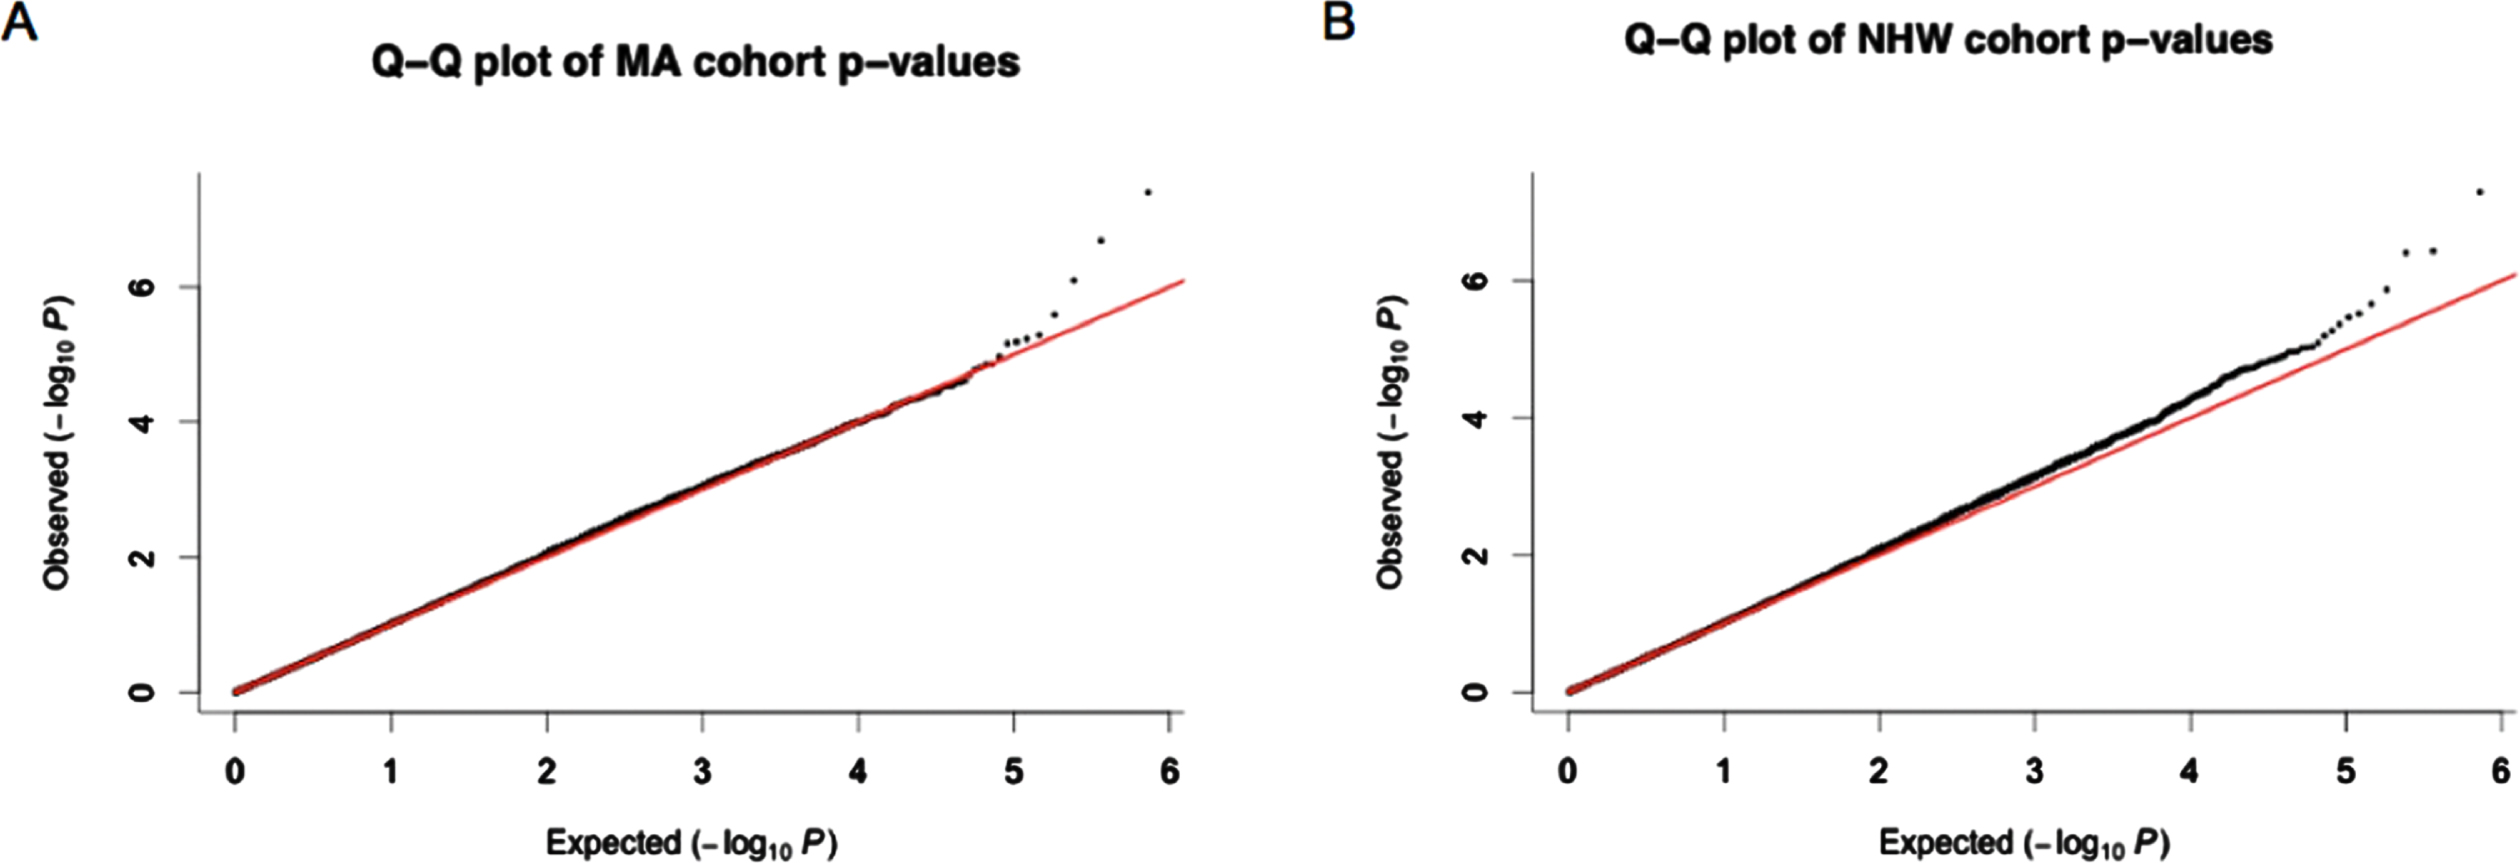 Q-Q plots obtained from p-values after adjusting for confounders using cate. A) p-values from the Mexican American (MA) cohort. B) p-values from the non-Hispanic white (NHW) cohort. Most of the p-values observed for each of the CpG sites investigated fall within the expected range of methylation differences between cognitively impaired individuals and normal controls however the outlier data points at the end of the graph suggested those CpG sites are differentially methylated between these groups.